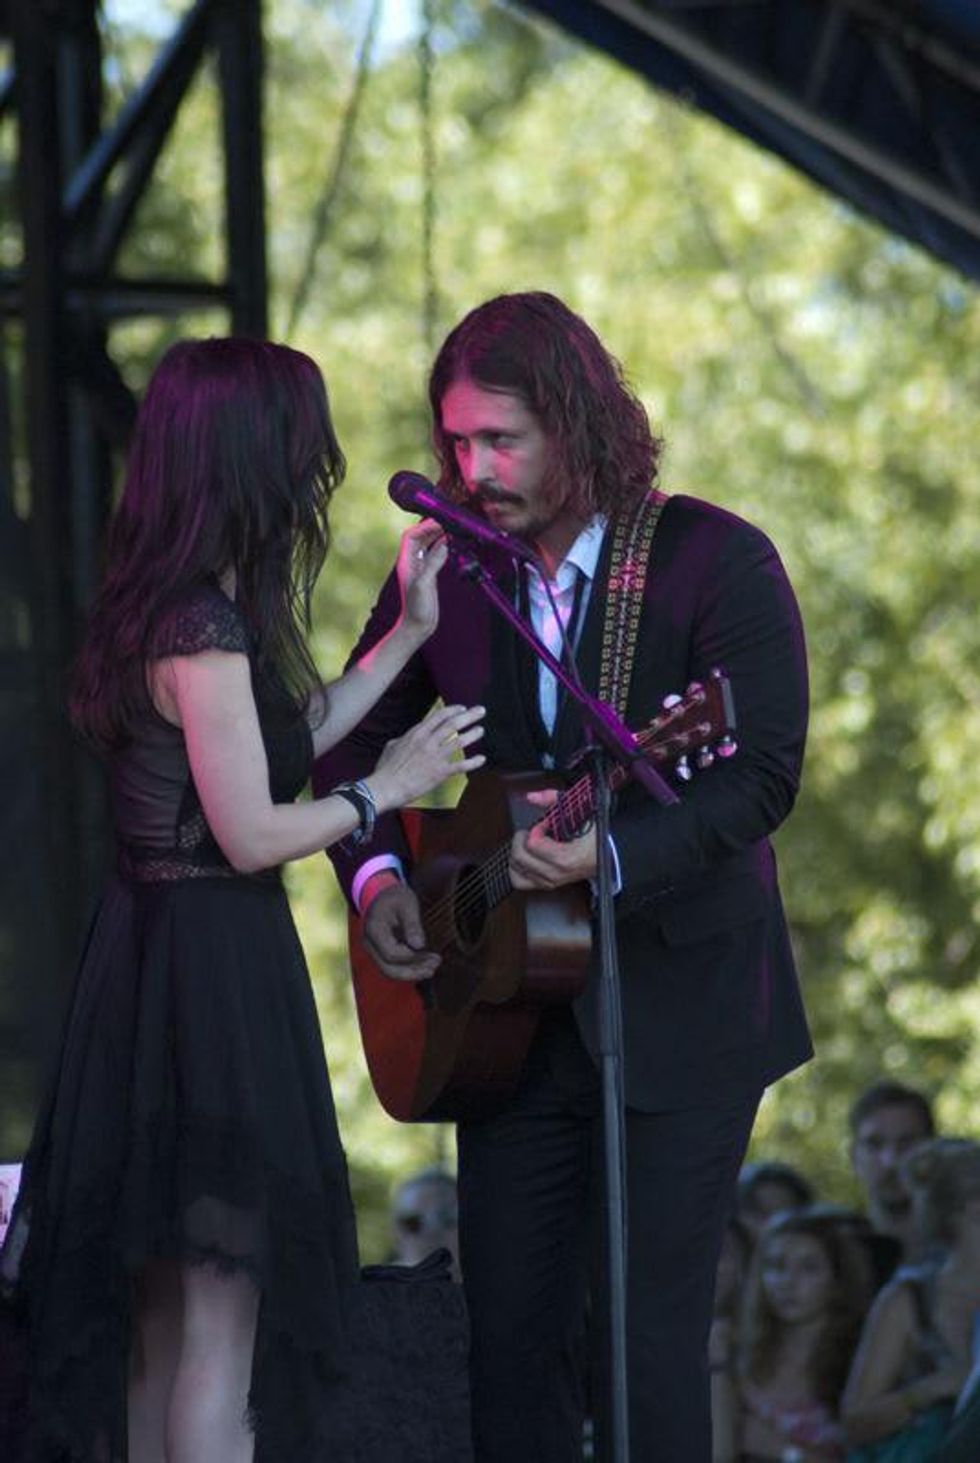 Austin Photo Set: Pages_acl day 2_oct 2012_the civil wars3